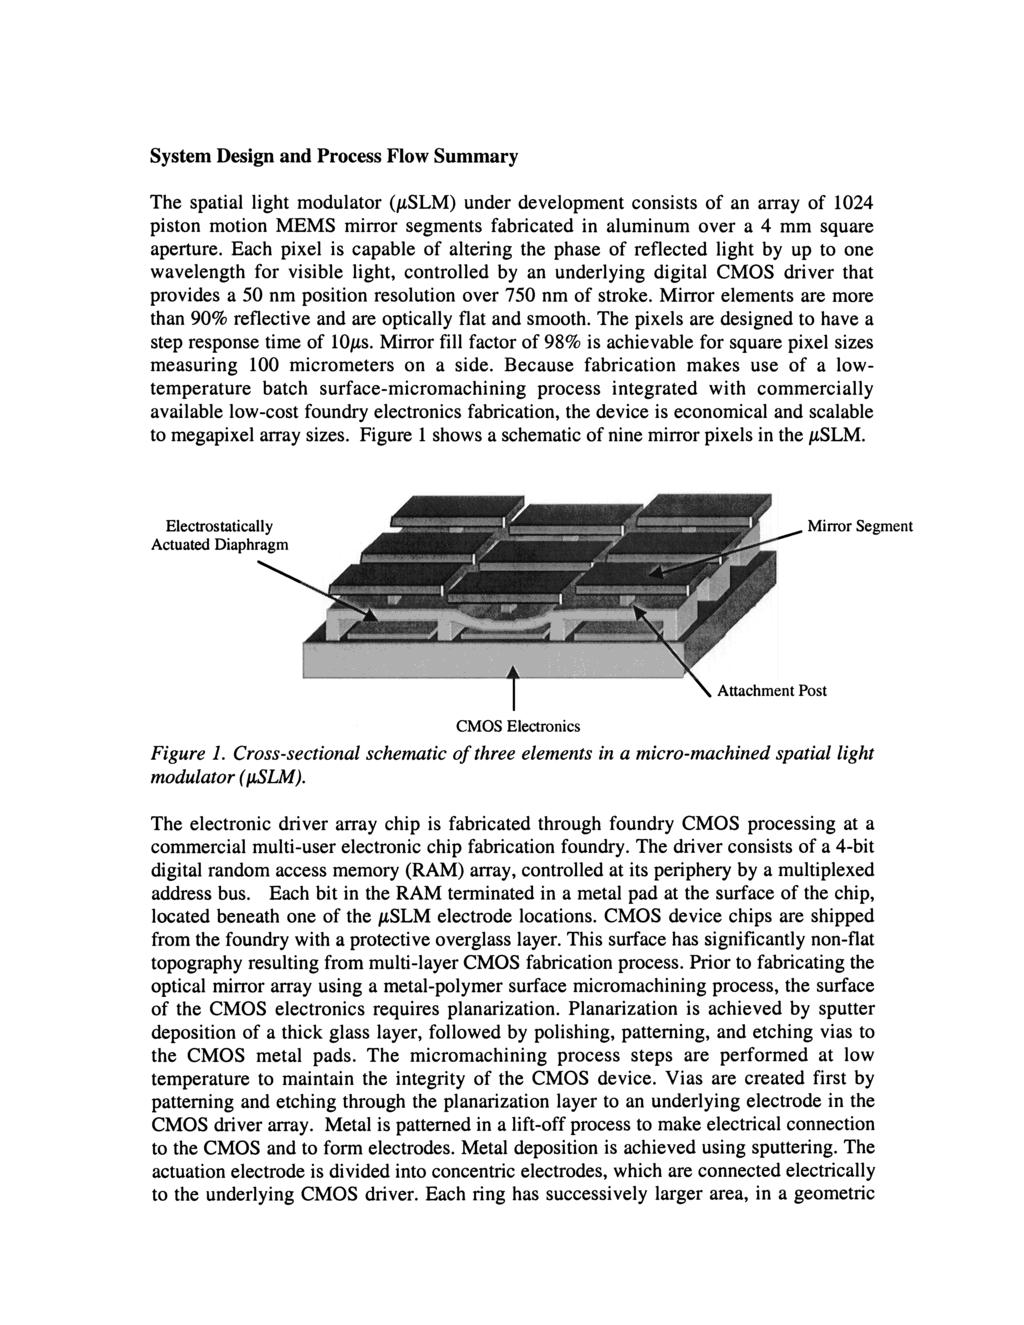 System Design and Process Flow Summary The spatial light modulator (jslm) under development consists of an array of 1024 piston motion MEMS mirror segments fabricated in aluminum over a 4 mm square